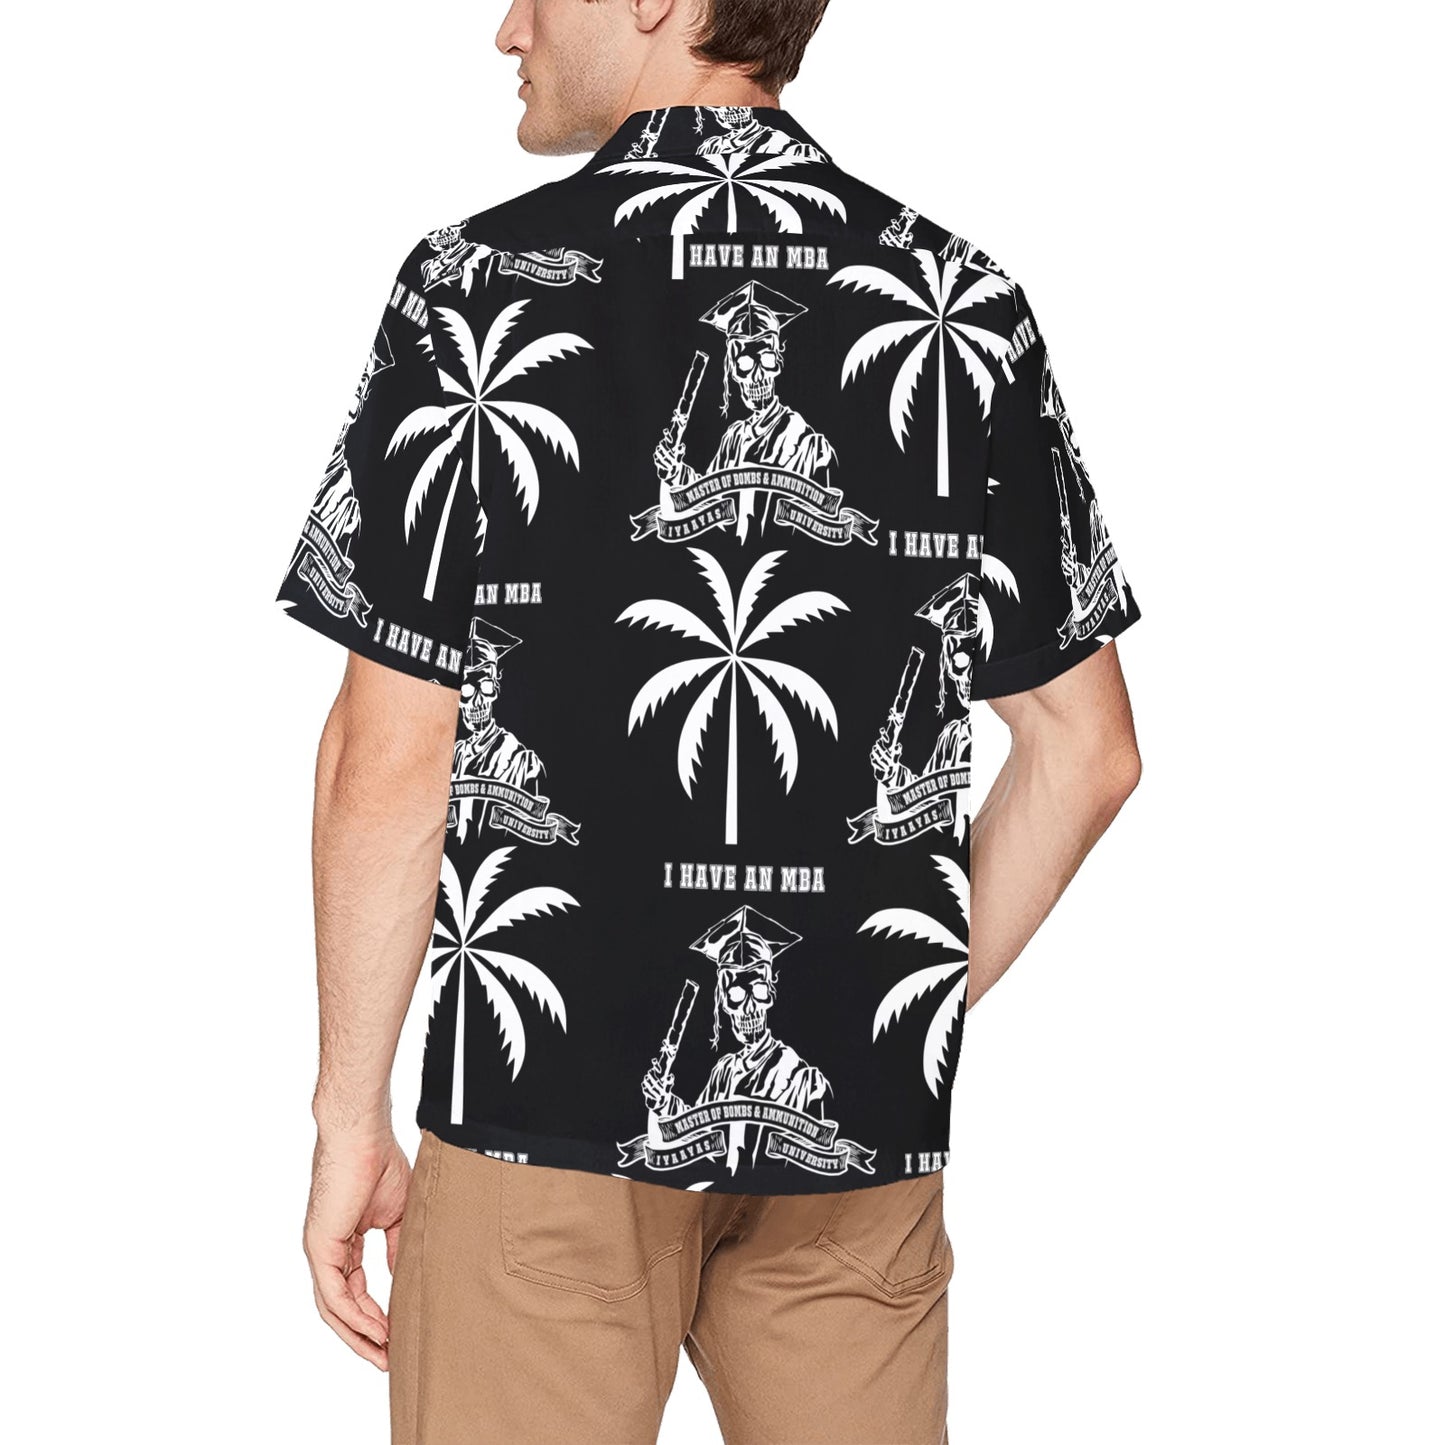 I have an MBA Master of Bombs and Ammunition Skeleton Cap and Gown Men’s Black Hawaiian Event Shirt With Left Chest Pocket